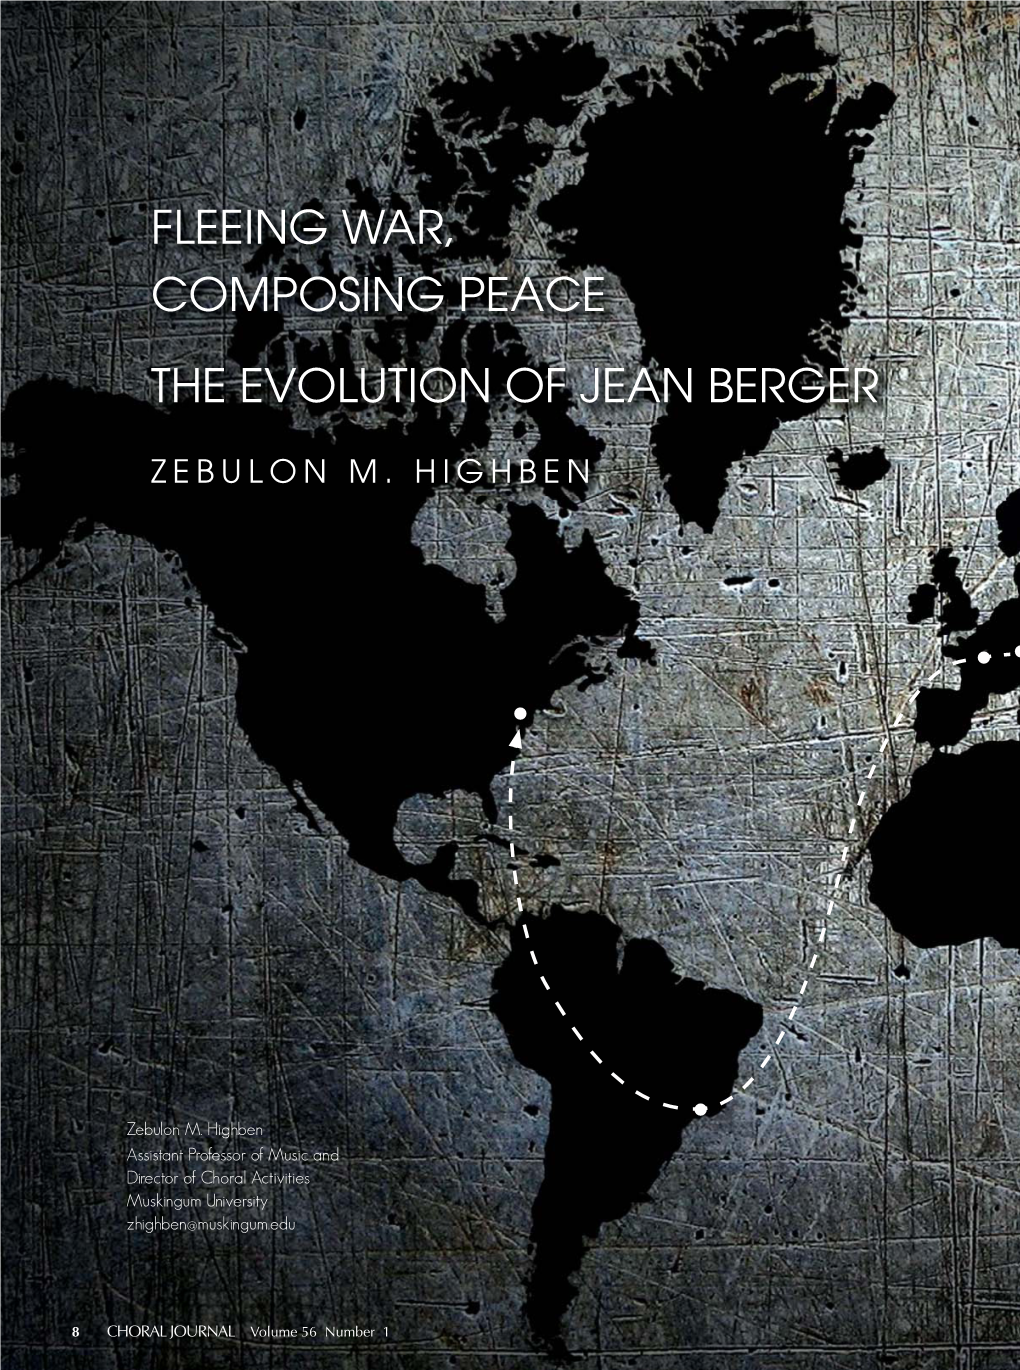 Fleeing War, Composing Peace the Evolution of Jean Berger